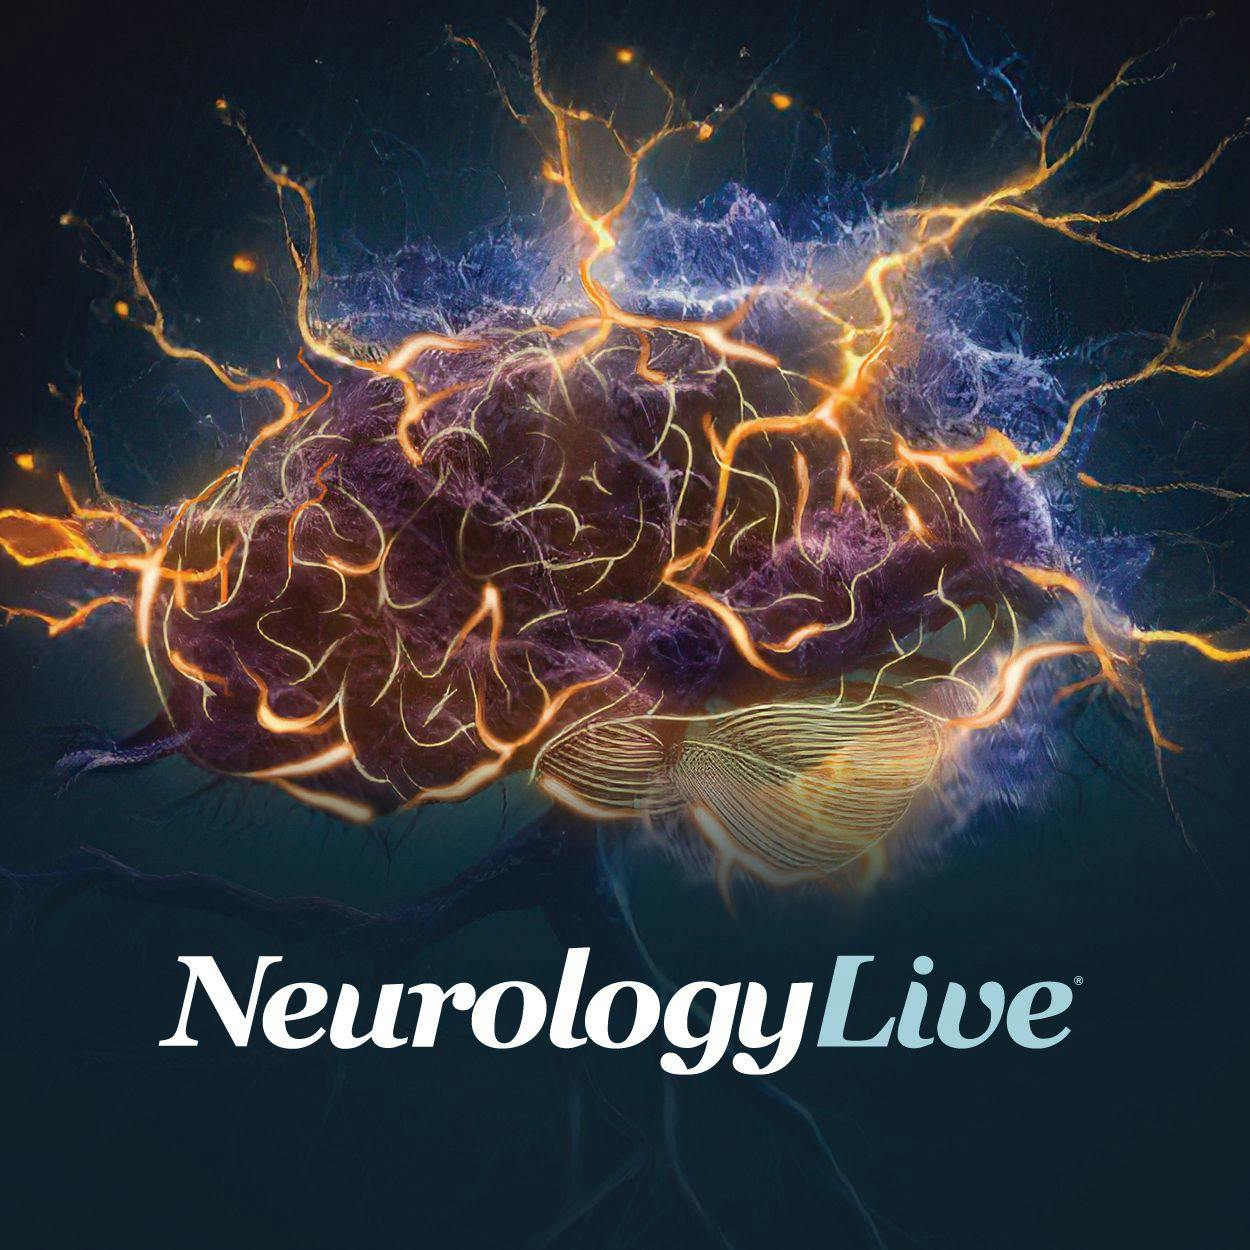 Serum Neurofilament Light Adds Complimentary Value to Monitoring Disease Progression in Relapsing Multiple Sclerosis